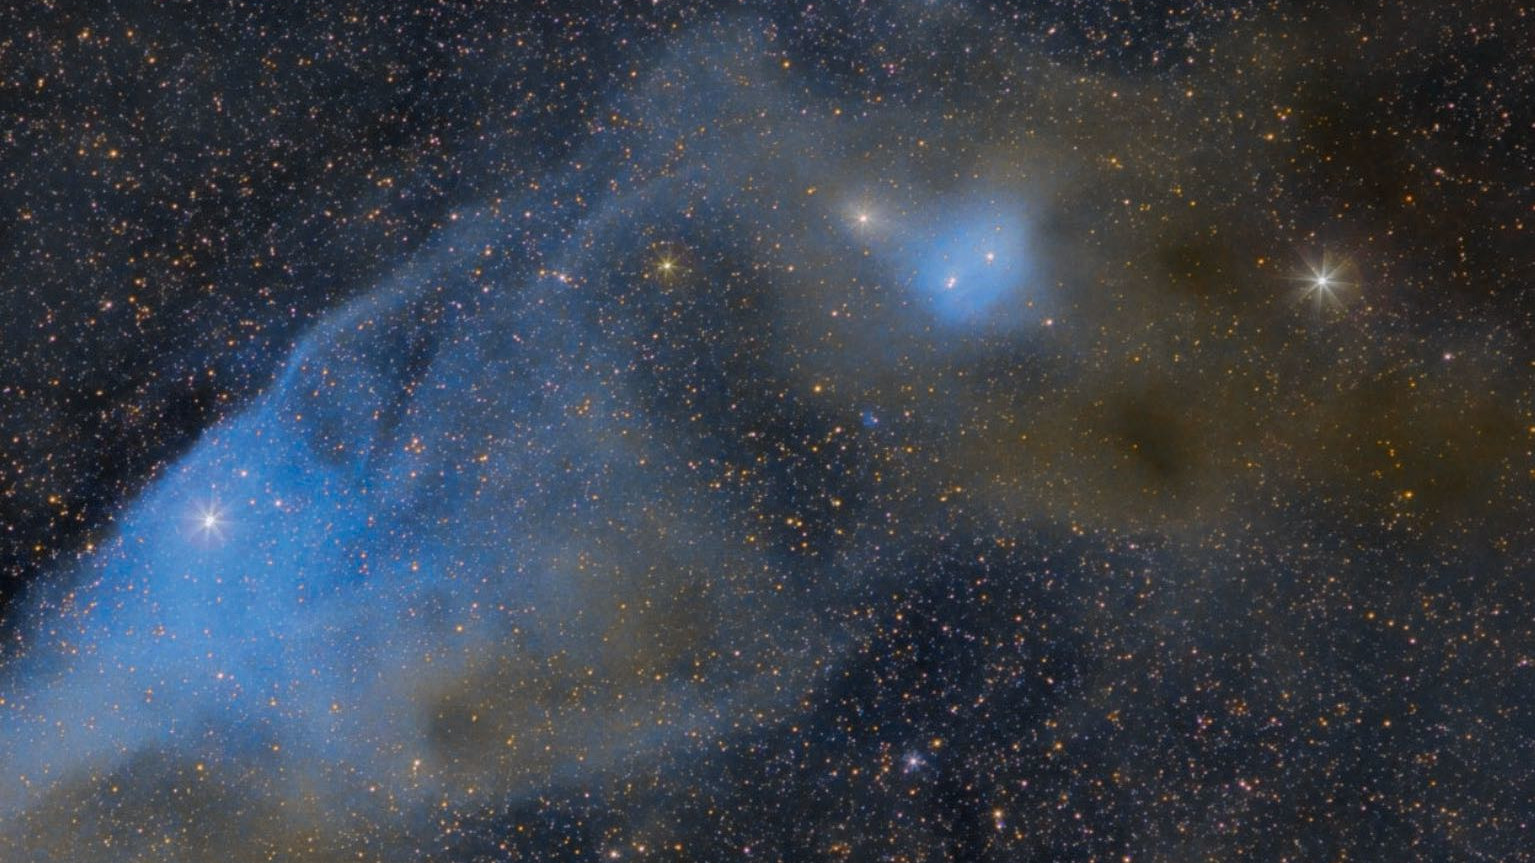 The Blue Horsehead Nebula IC 4592 in Scorpius (north
 is at the bottom). The star ν Scorpii is located on the bridge of the nose and provides the bluish colour. Below the horse’s ears you can see the equally bluish nebula IC 4601. Scott Rosen